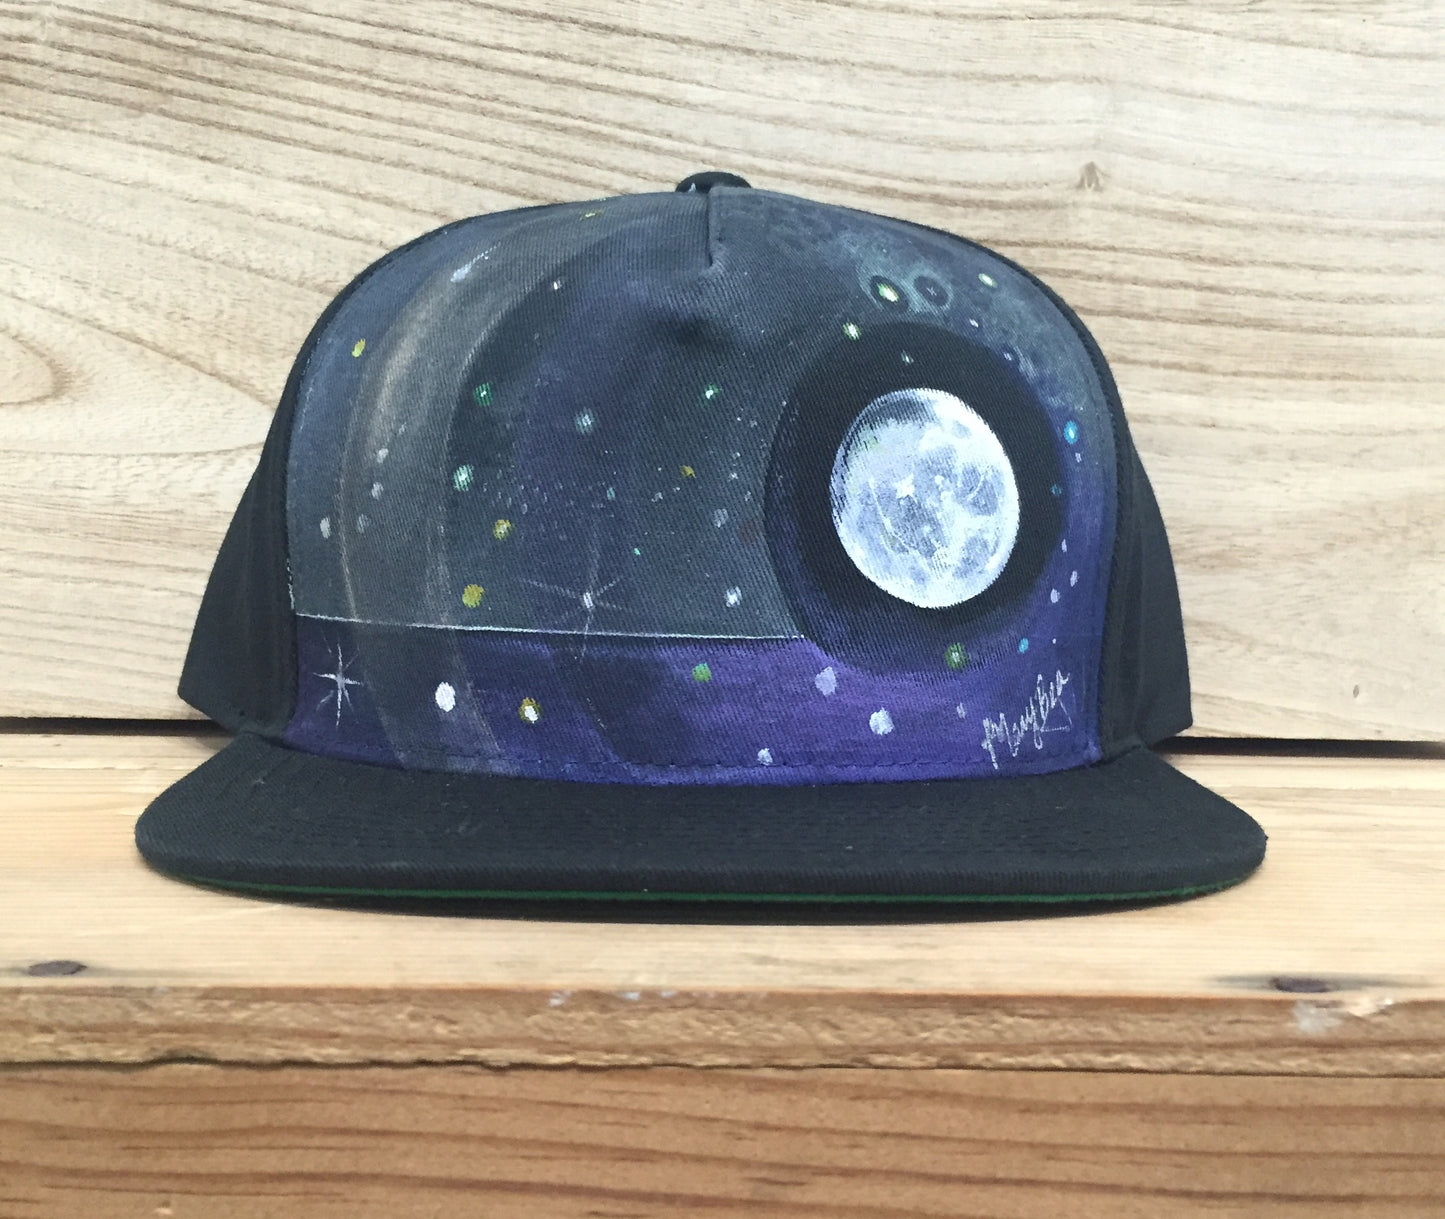 "Outer Space2" Hand Painted on Black Snapback Hat